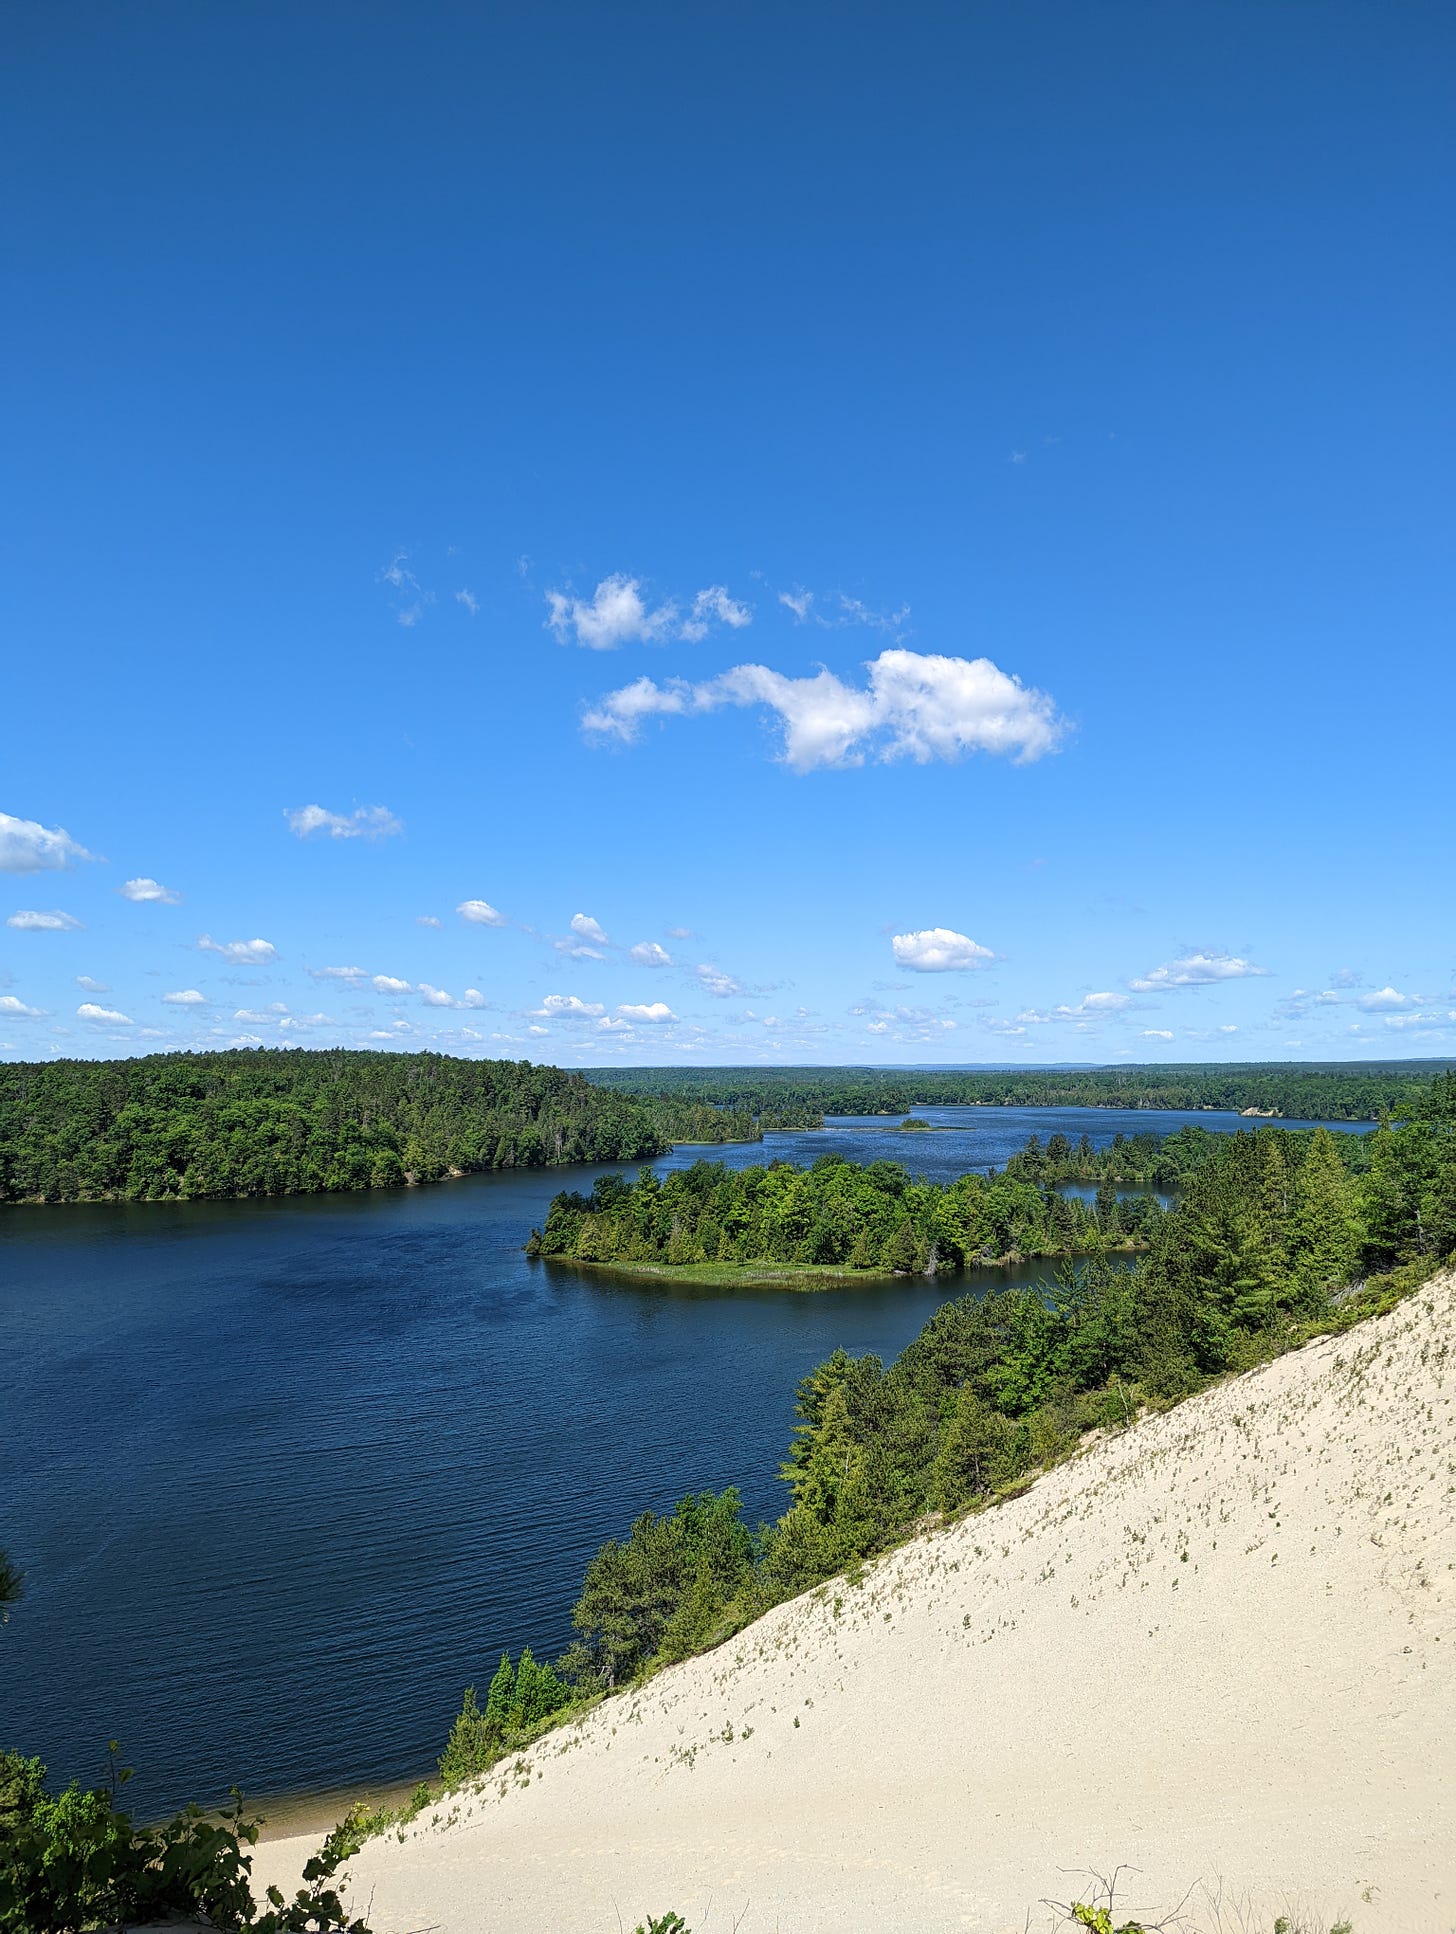 A few clouds hang on a bright blue sky above a finger lake and bright green forest trees. A sand dune is in the foreground.